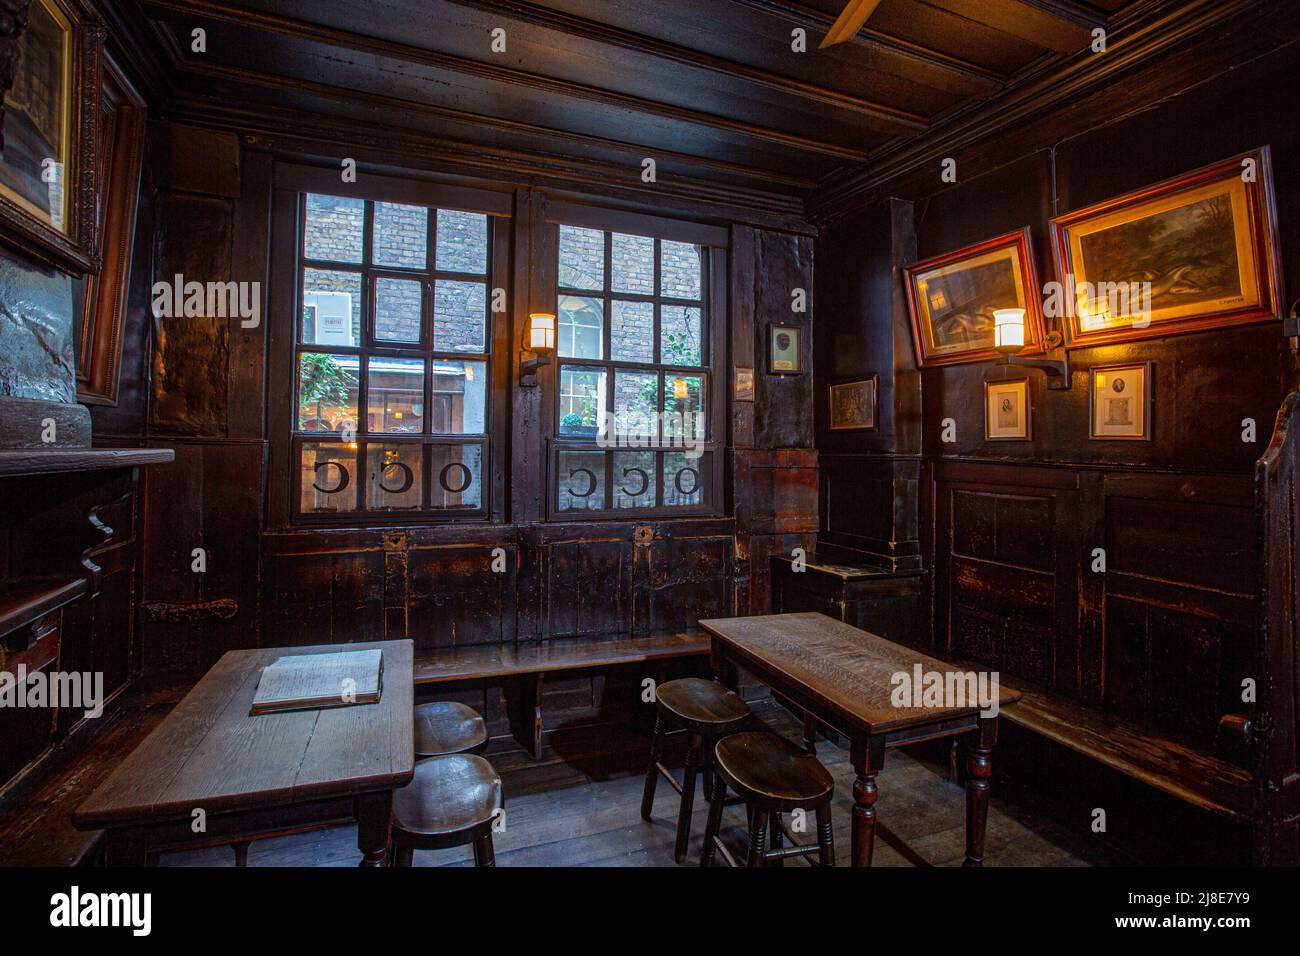 Interior view of the traditional pub The Ye Olde Cheshire Cheese The City of London,United Kingdom Stock Photo